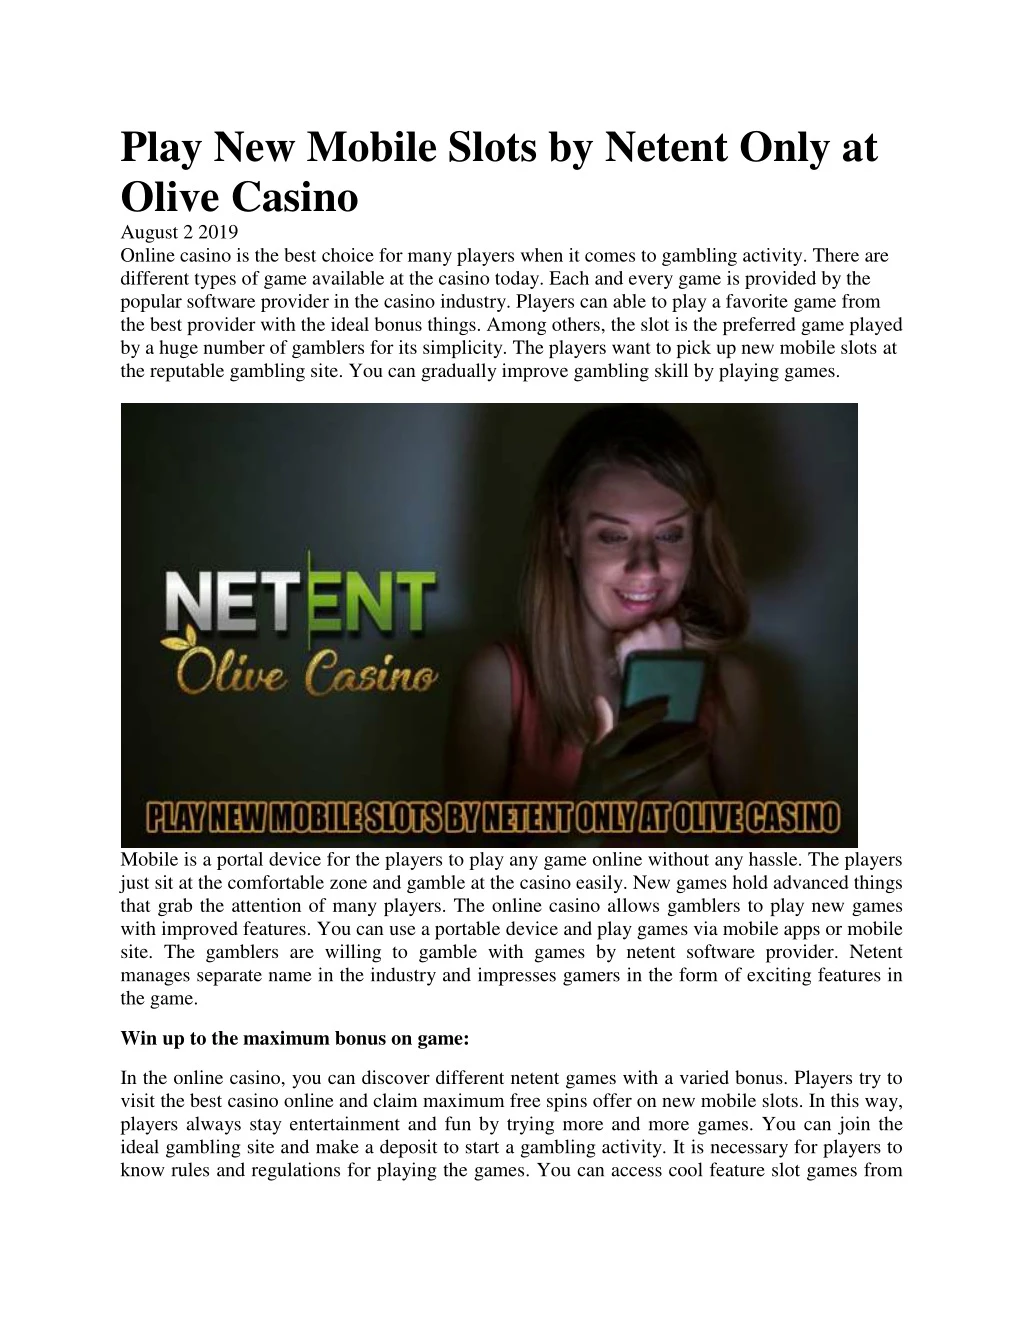 play new mobile slots by netent only at olive